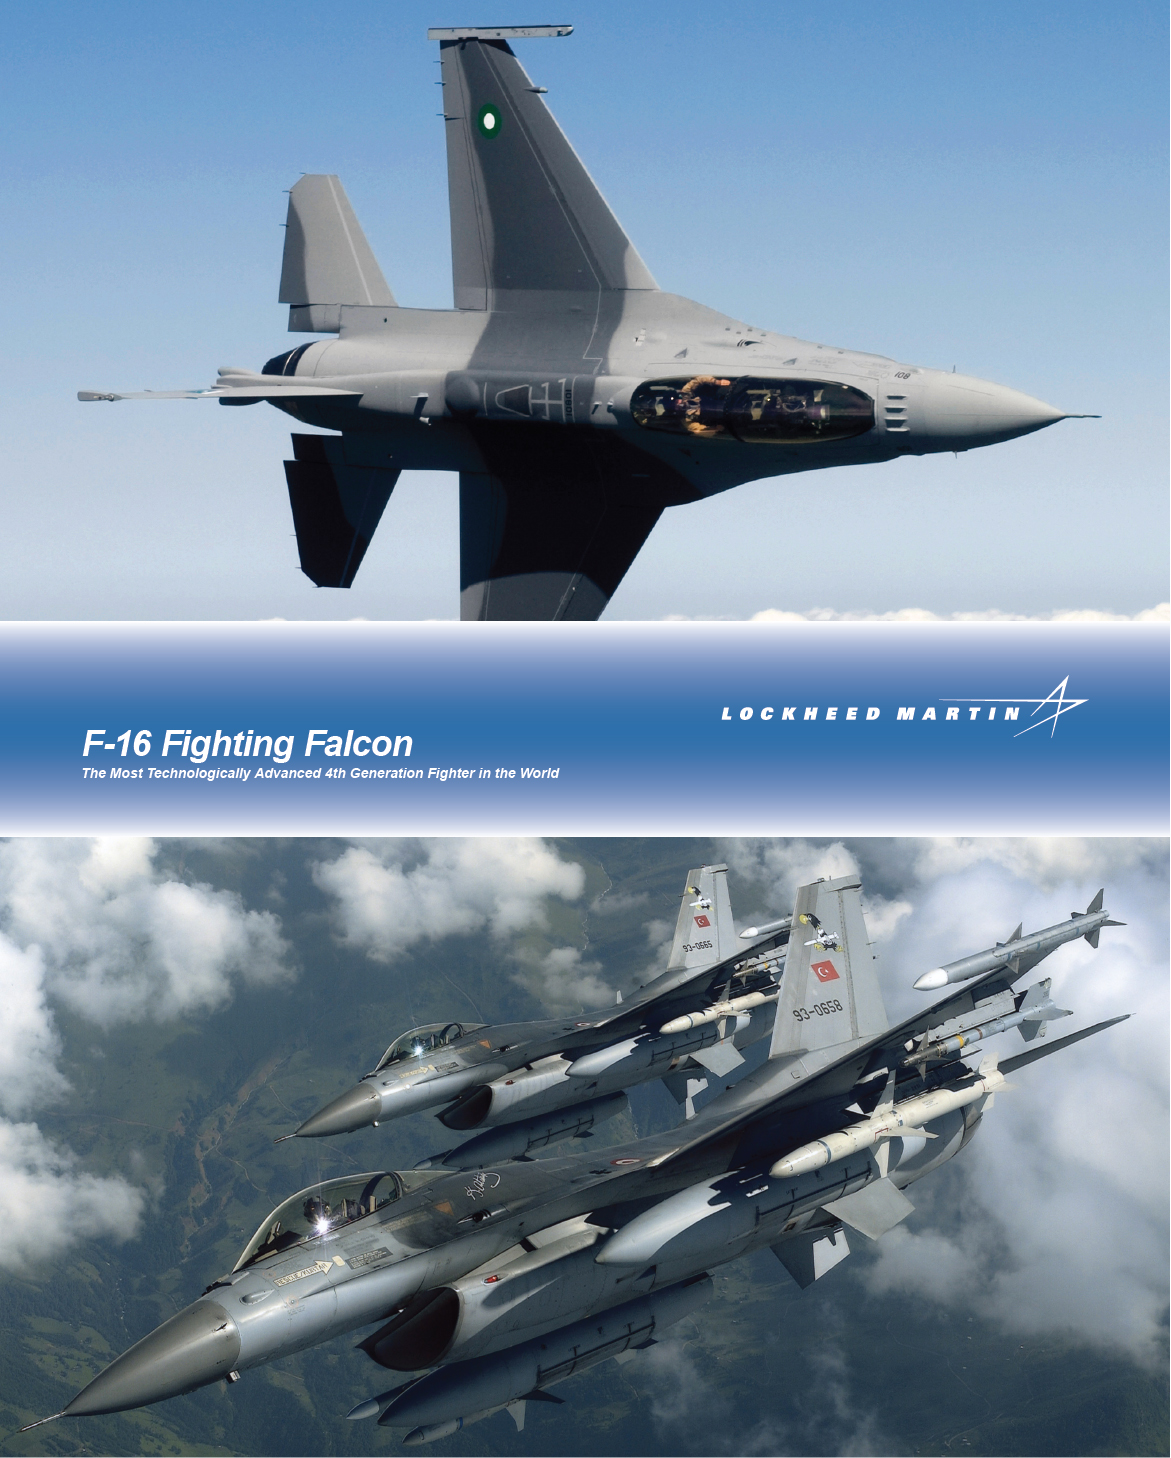 Poster for the Lockheed Martin F-16